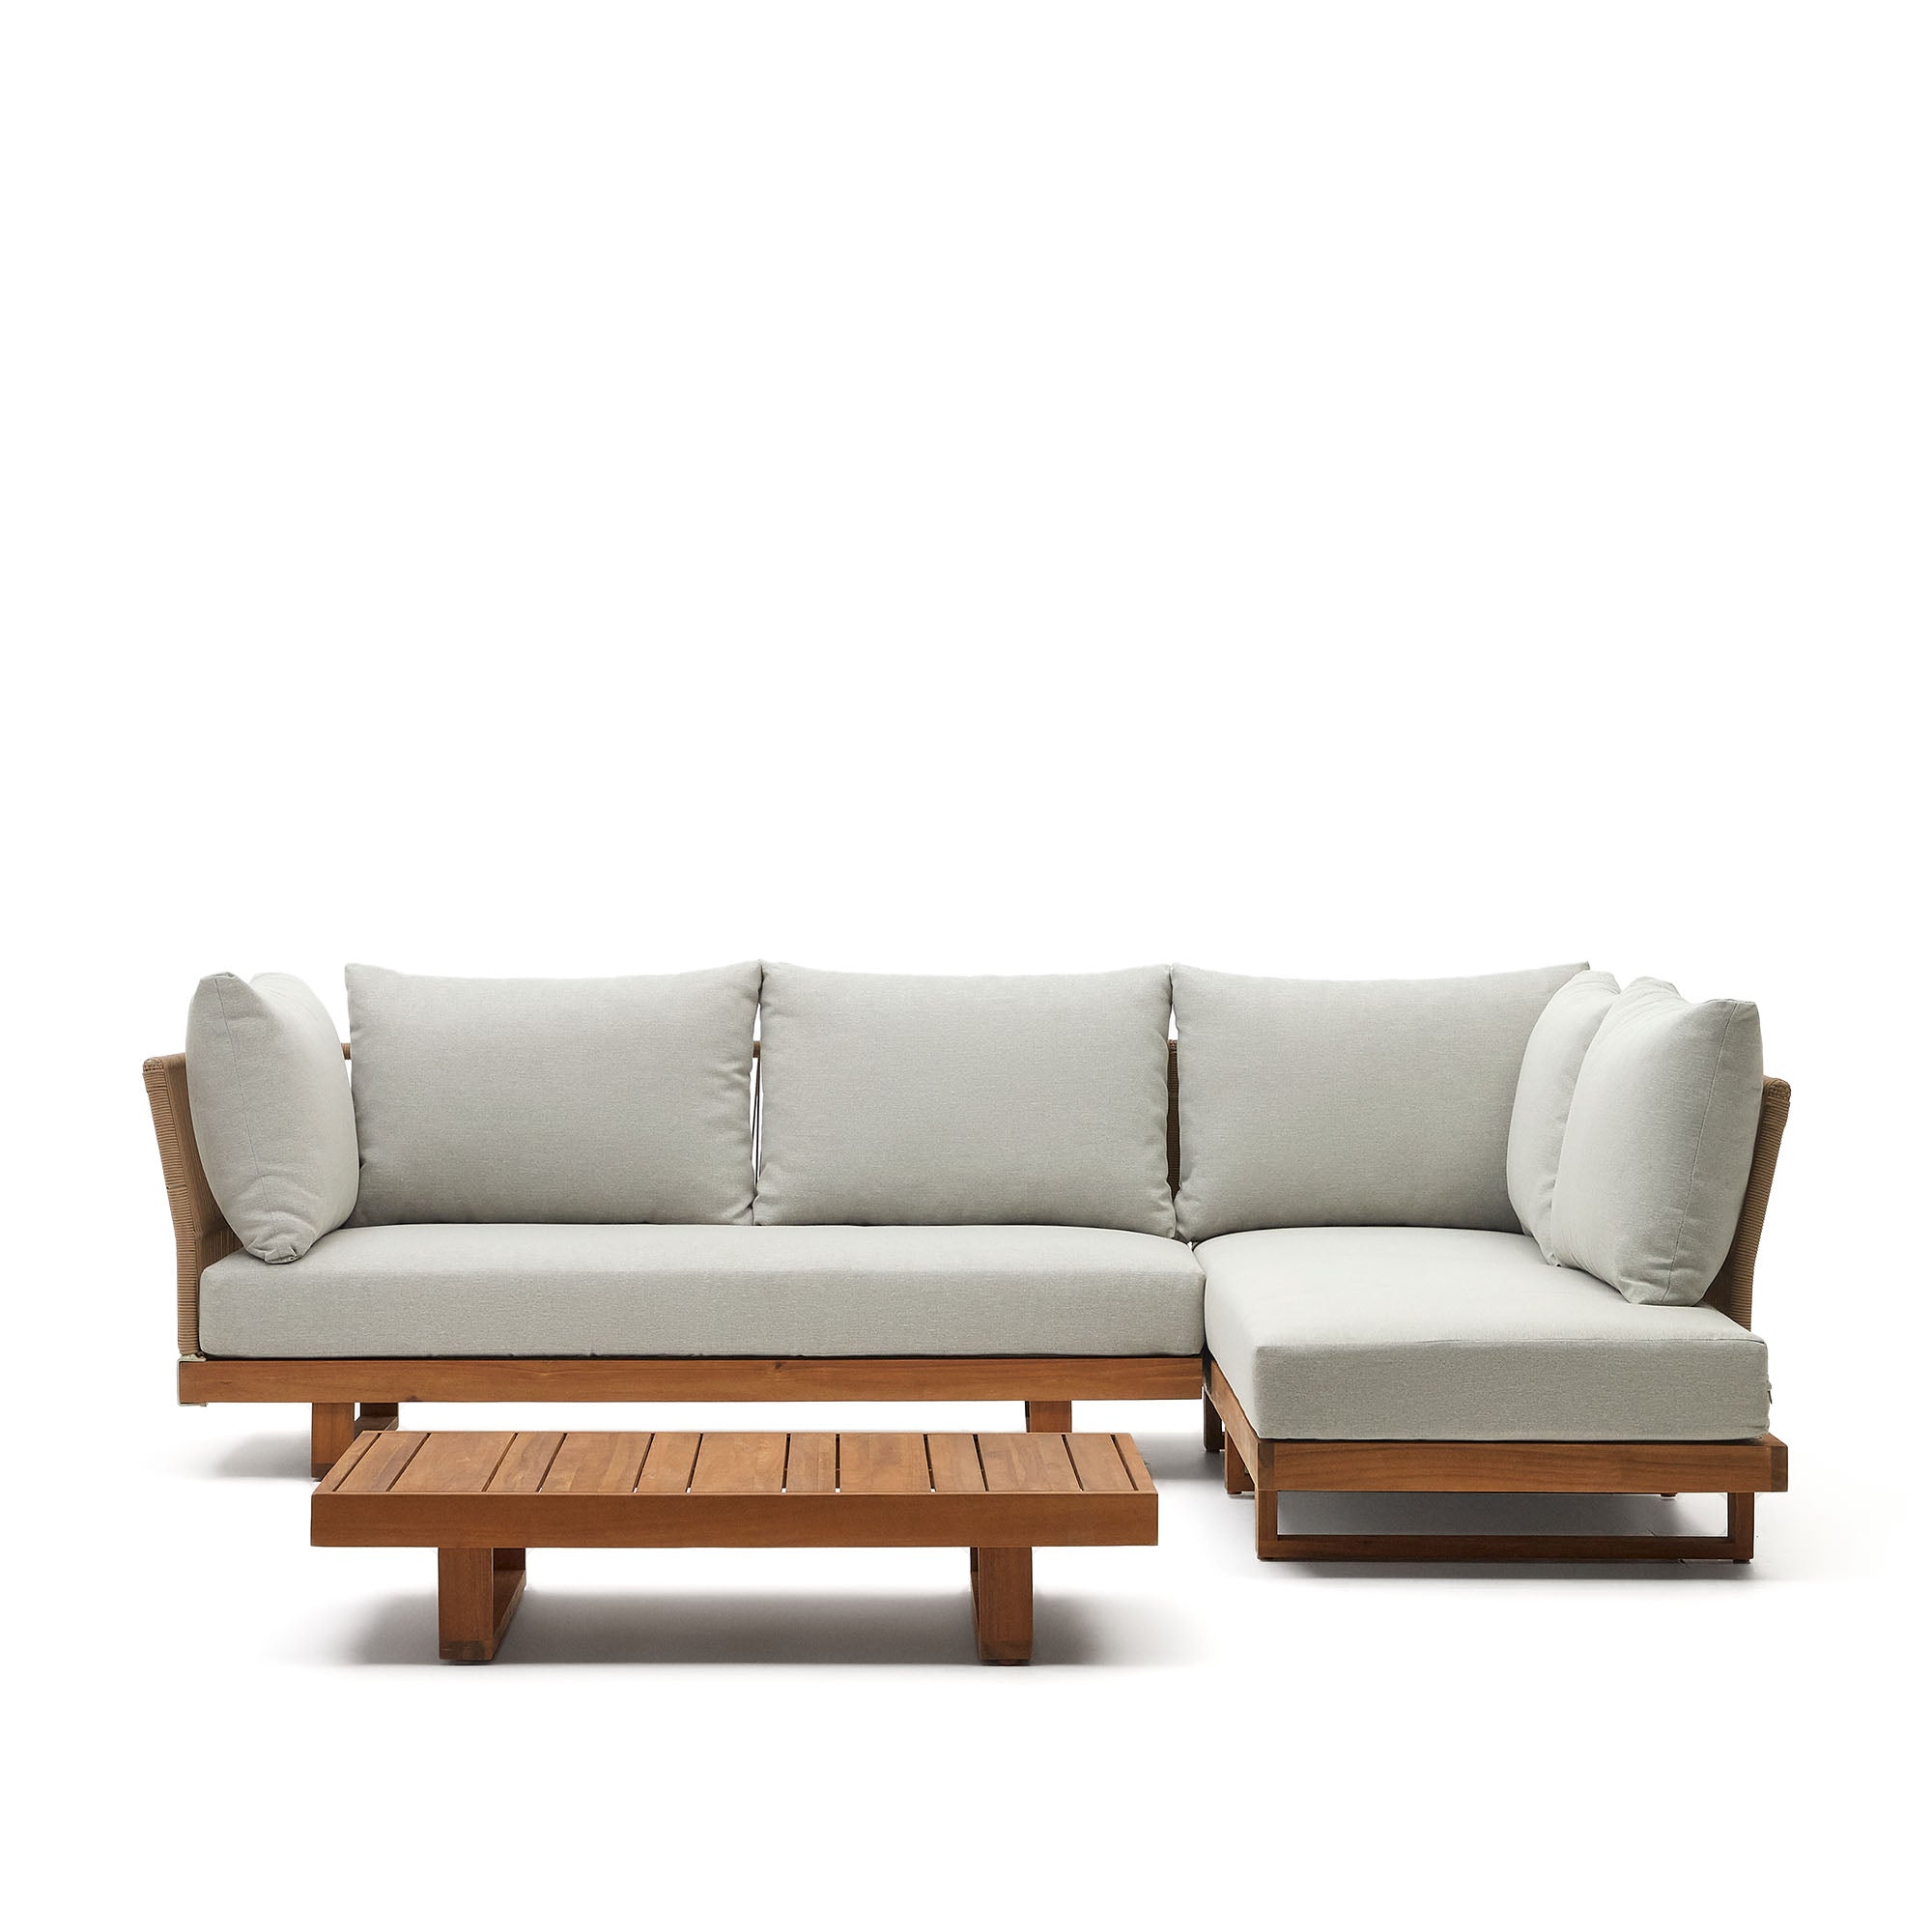 Raco 5 seater corner sofa and coffee table, made from solid acacia wood